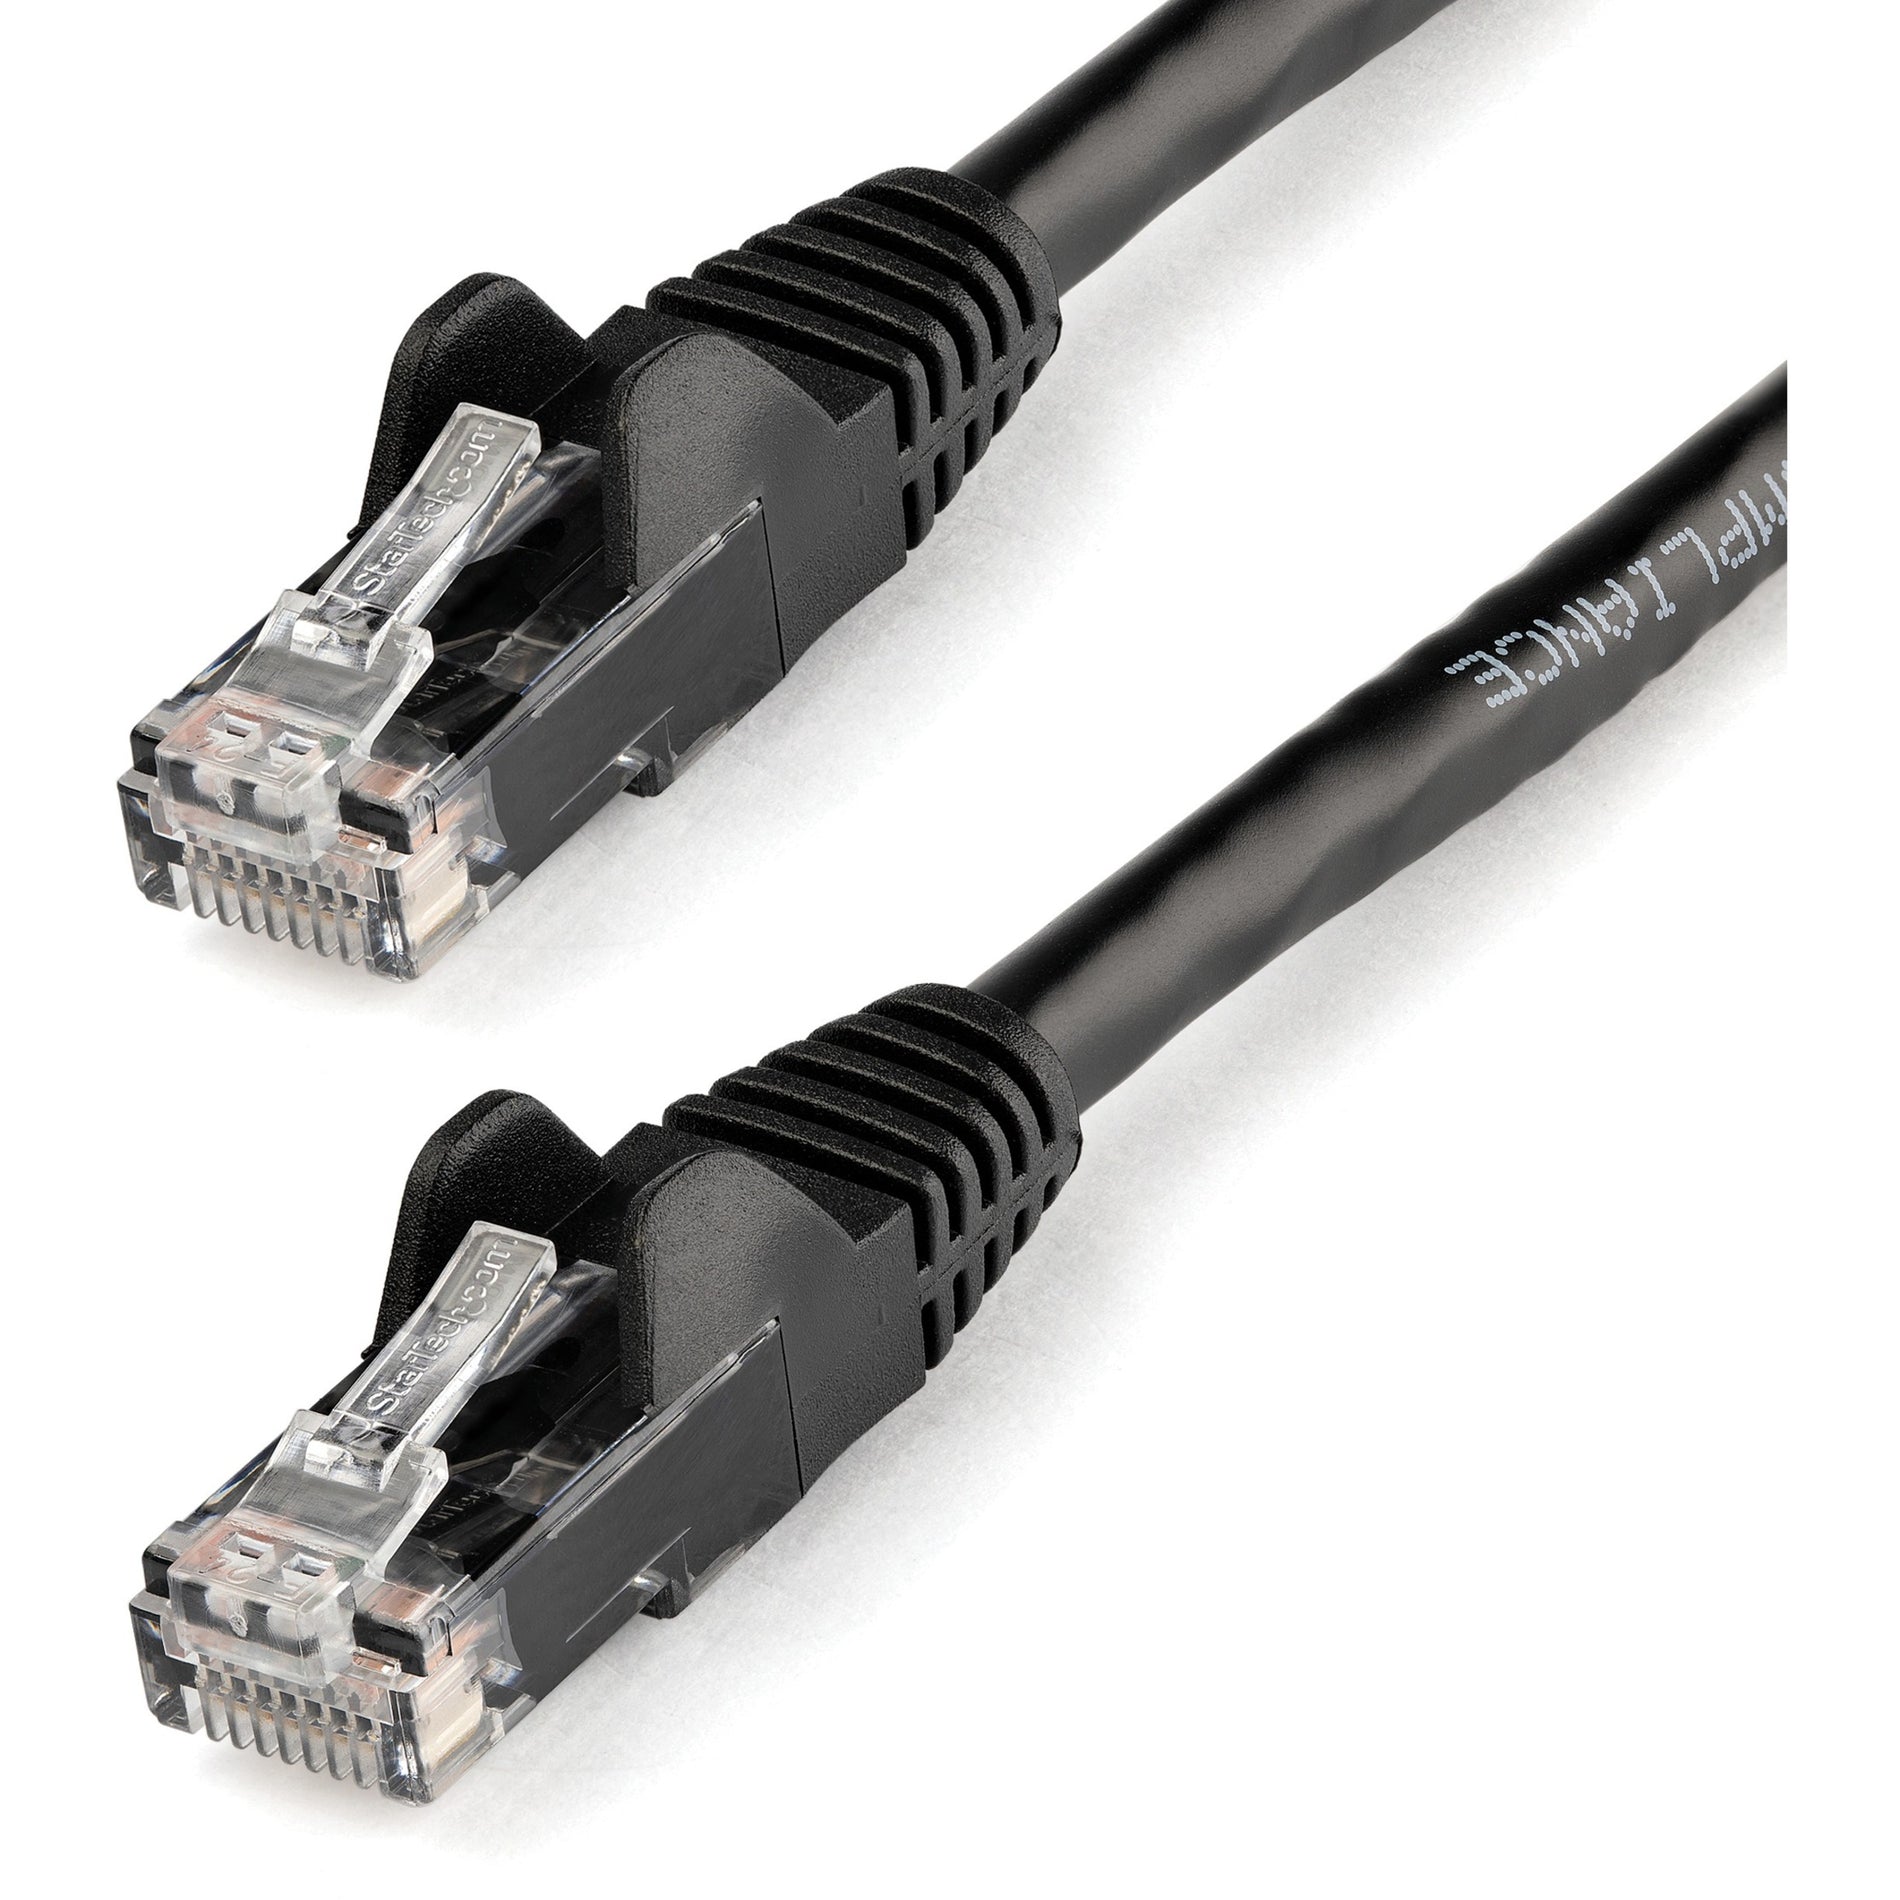 StarTech.com N6PATCH2BK Cat. 6 Network Cable, 2ft Black Cat6 Patch Cable with Snagless RJ45 Connectors, Ethernet Cable